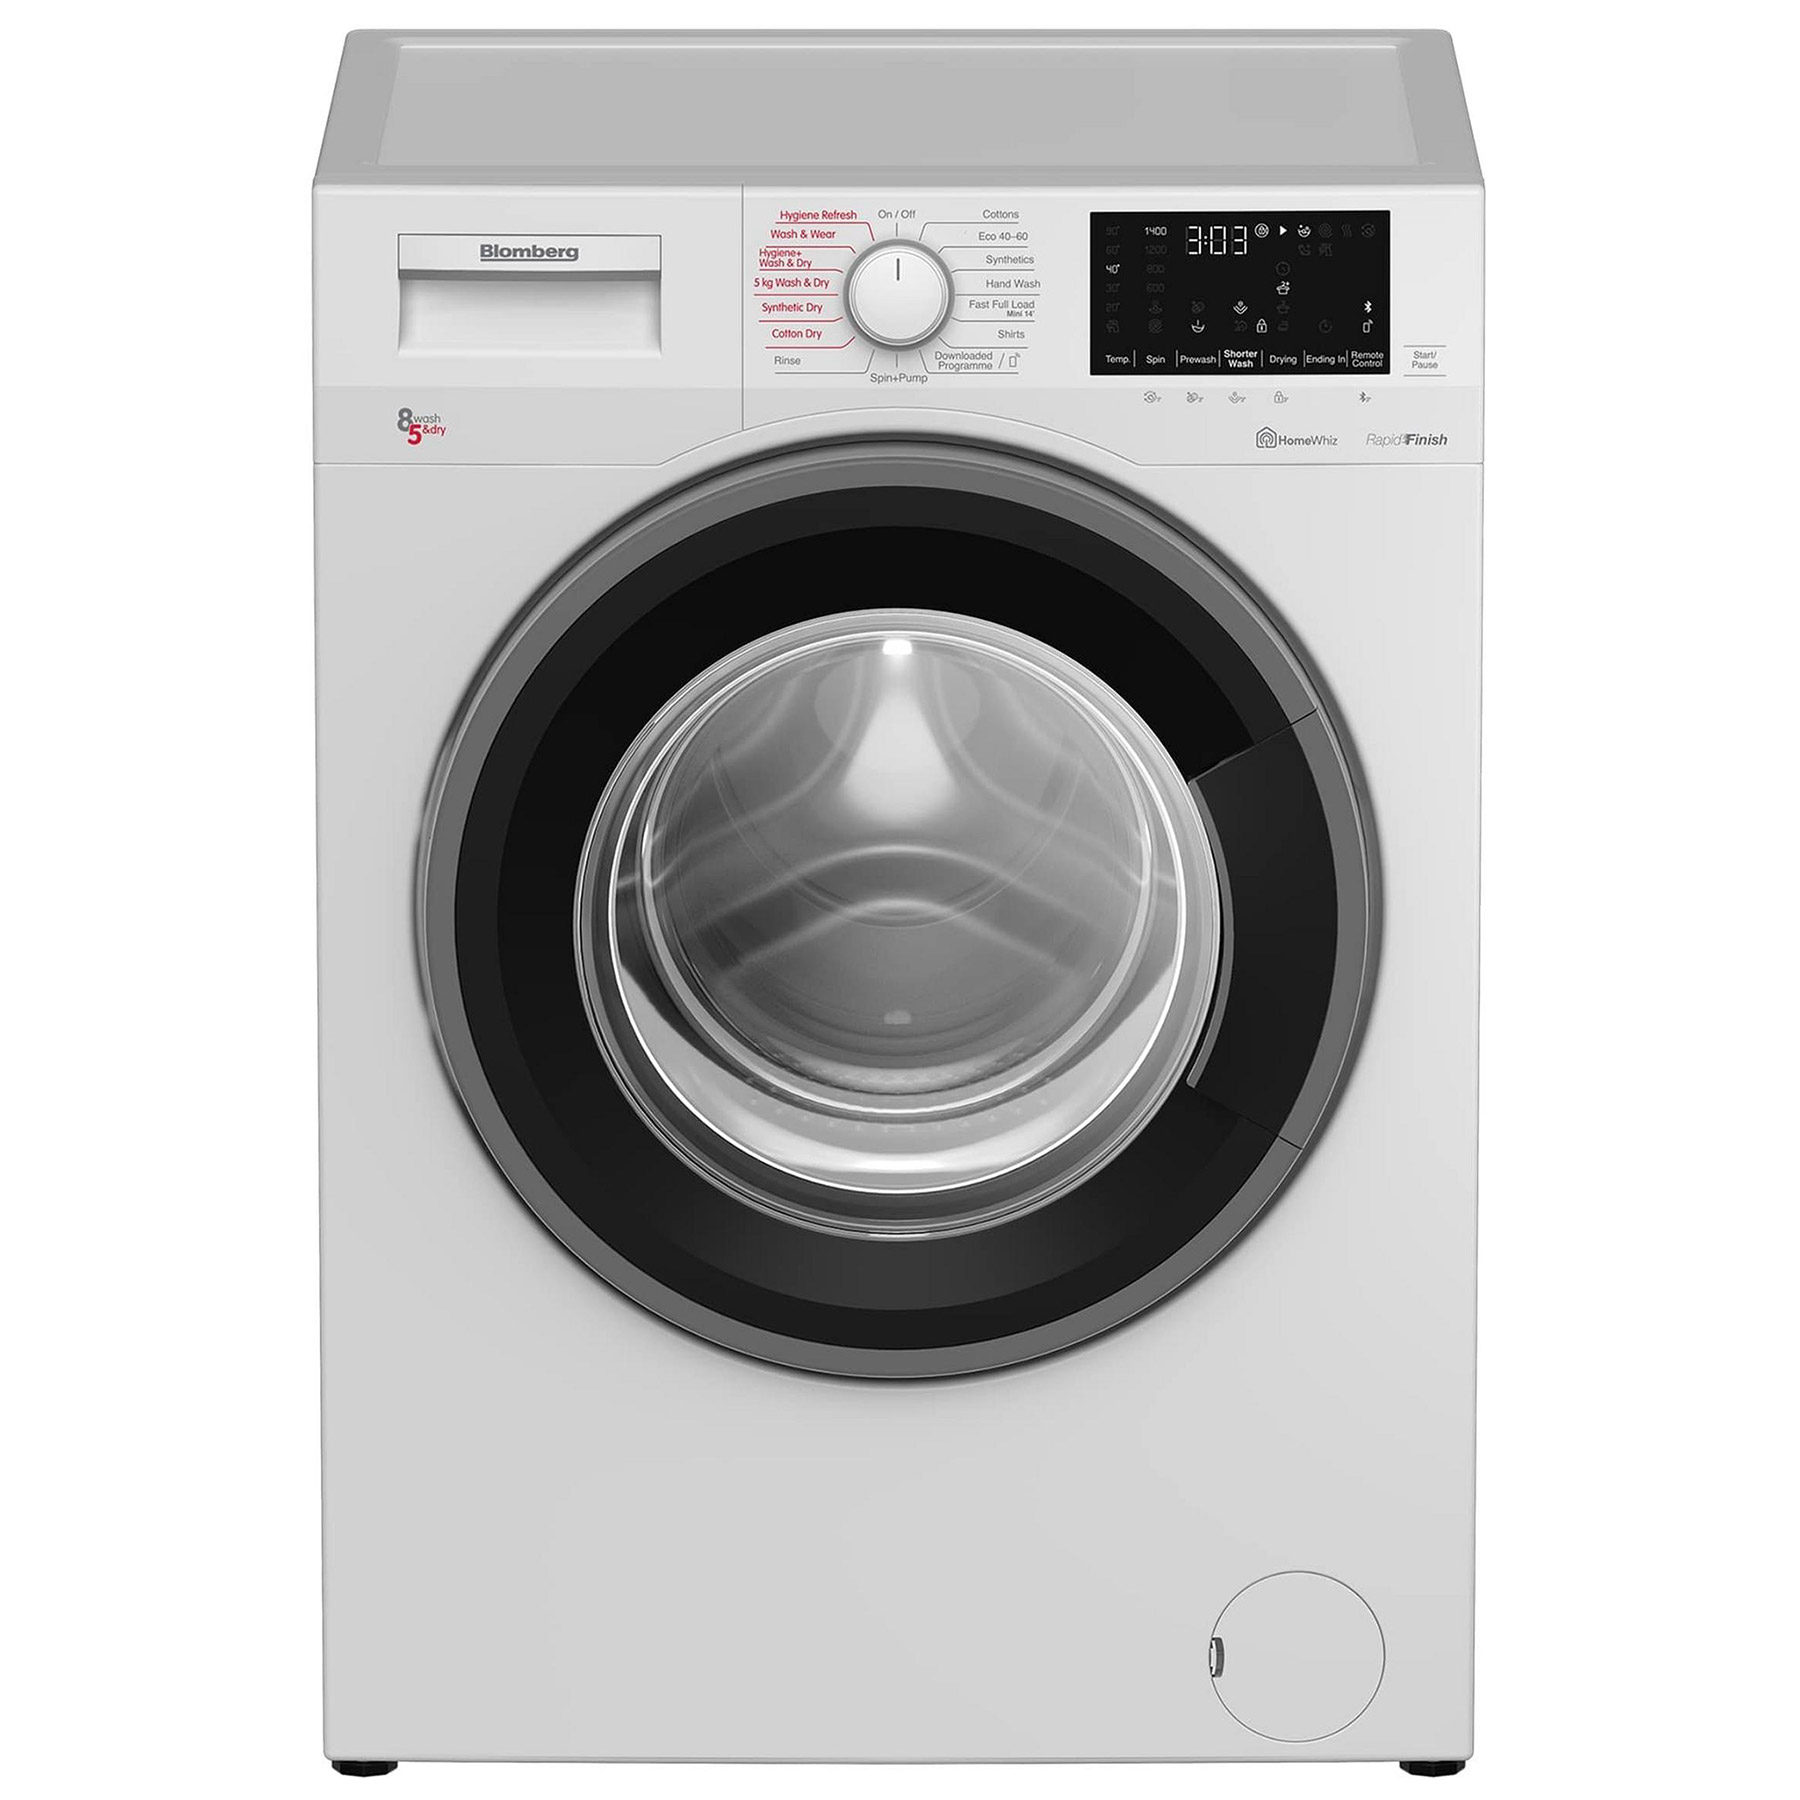 Image of Blomberg LRF1854311W Washer Dryer in White 1400rpm 8kg 5kg D Rated